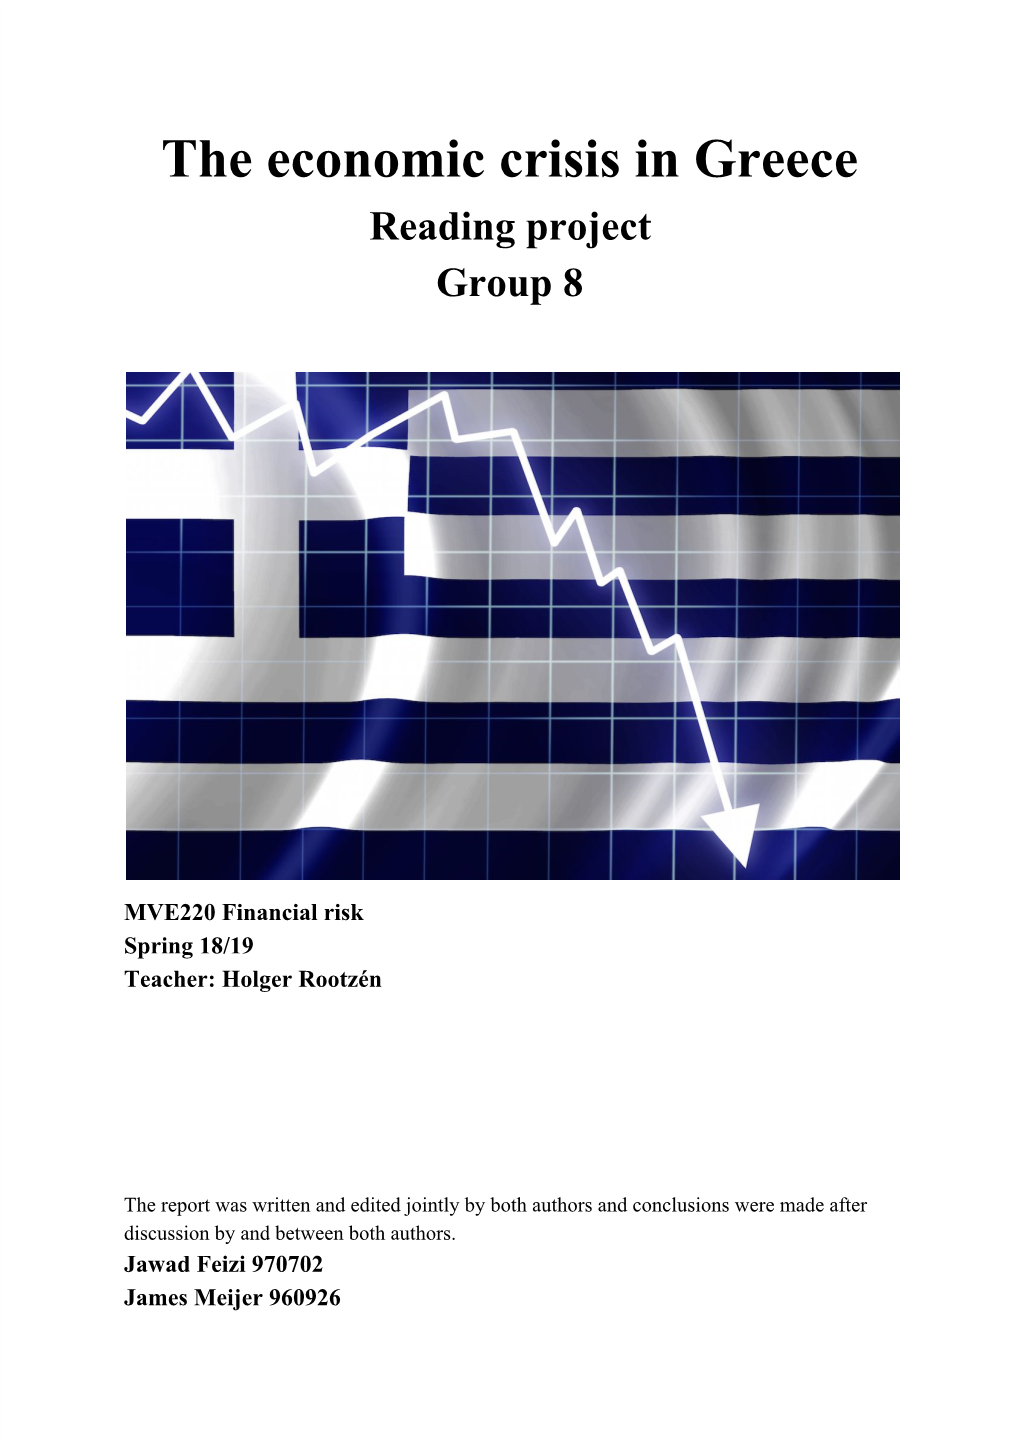 The Economic Crisis in Greece Reading Project Group 8